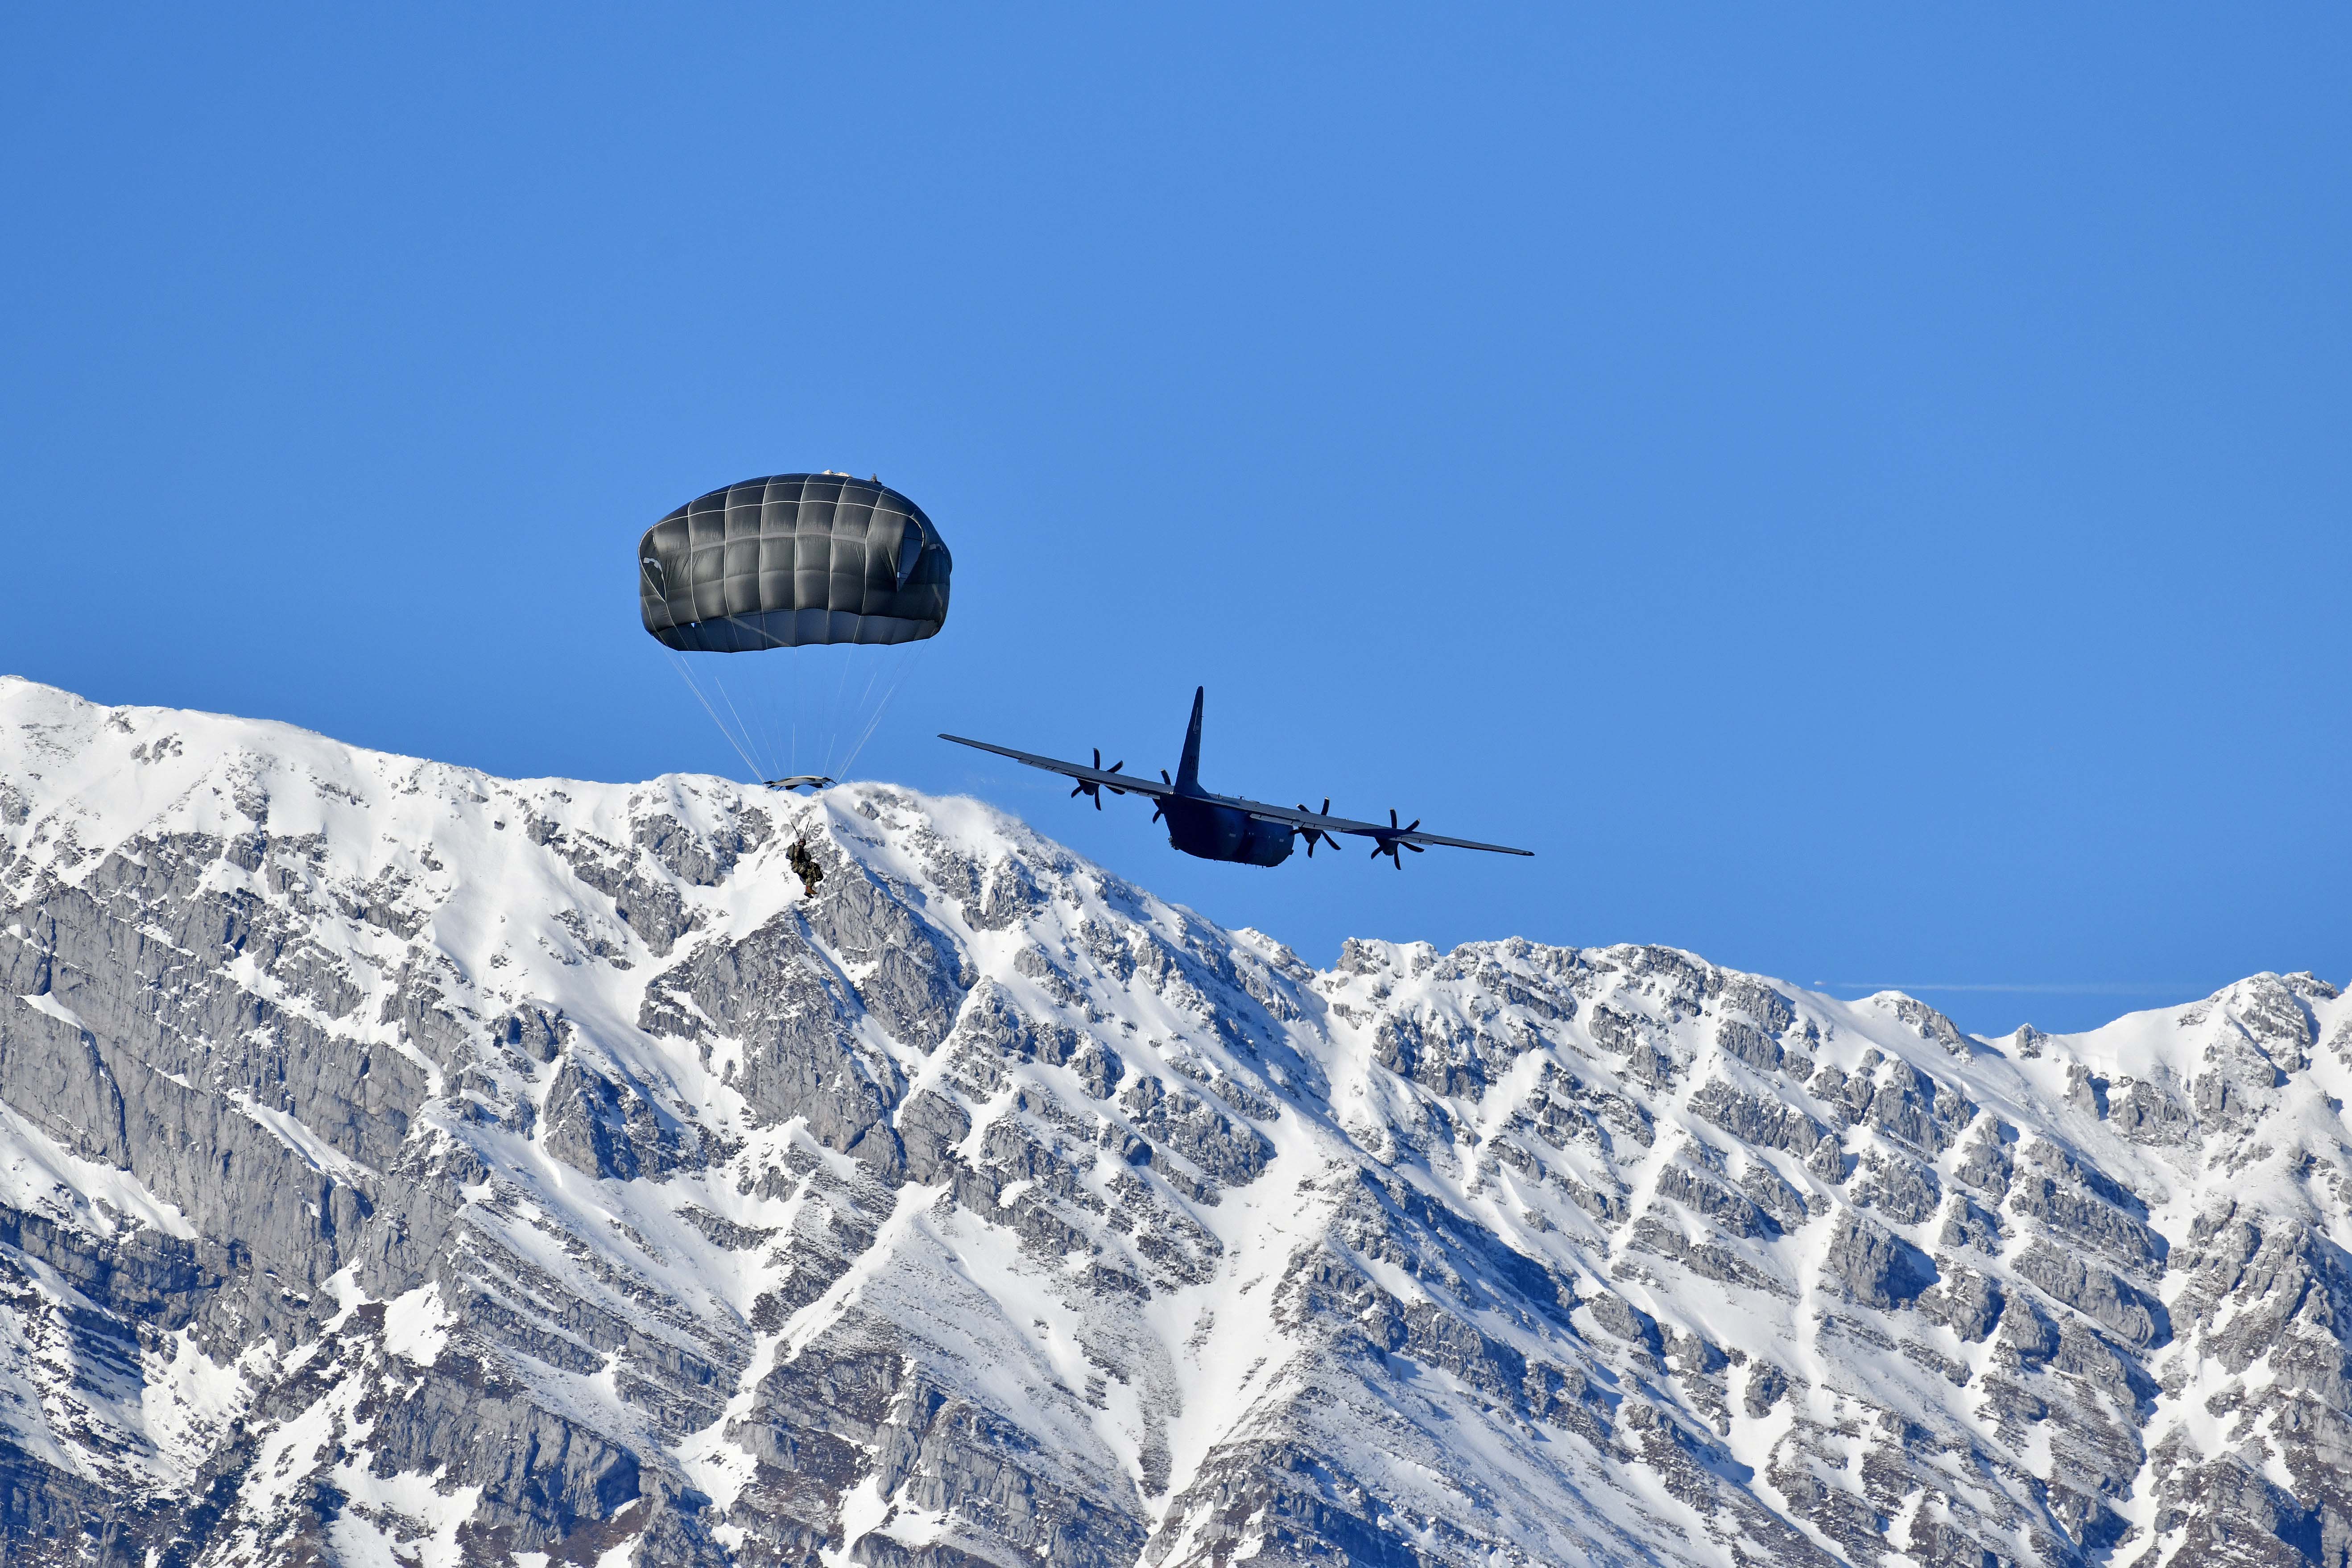 U.S. paratroopers jump from a C-130 Hercules aircraft over Juliet